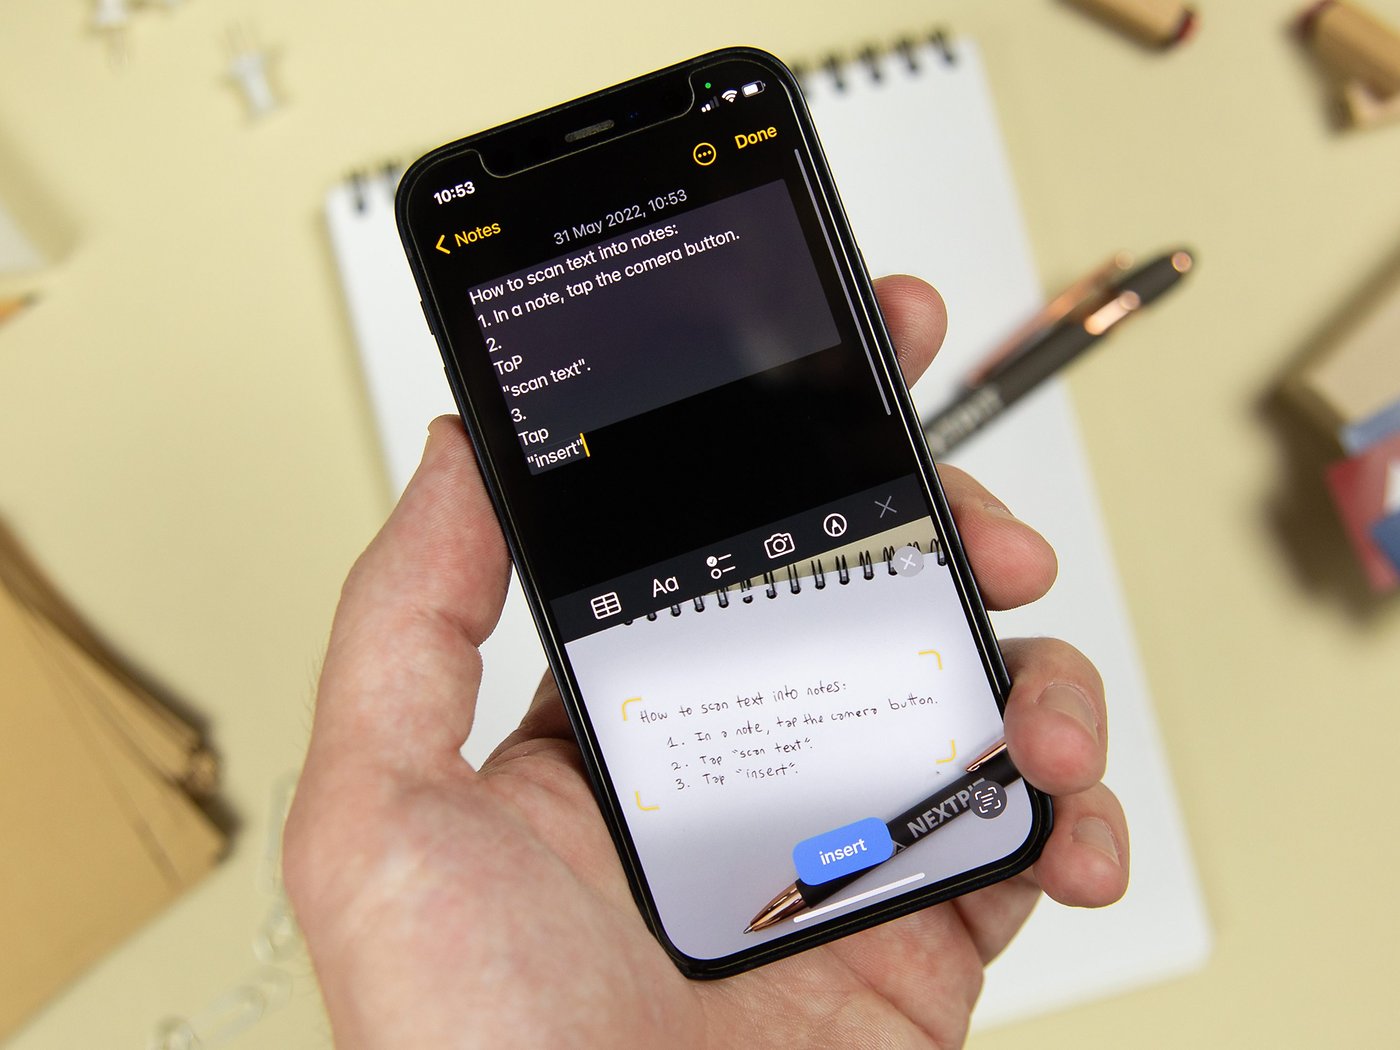 Master Apple Notes: How to scan text into a note